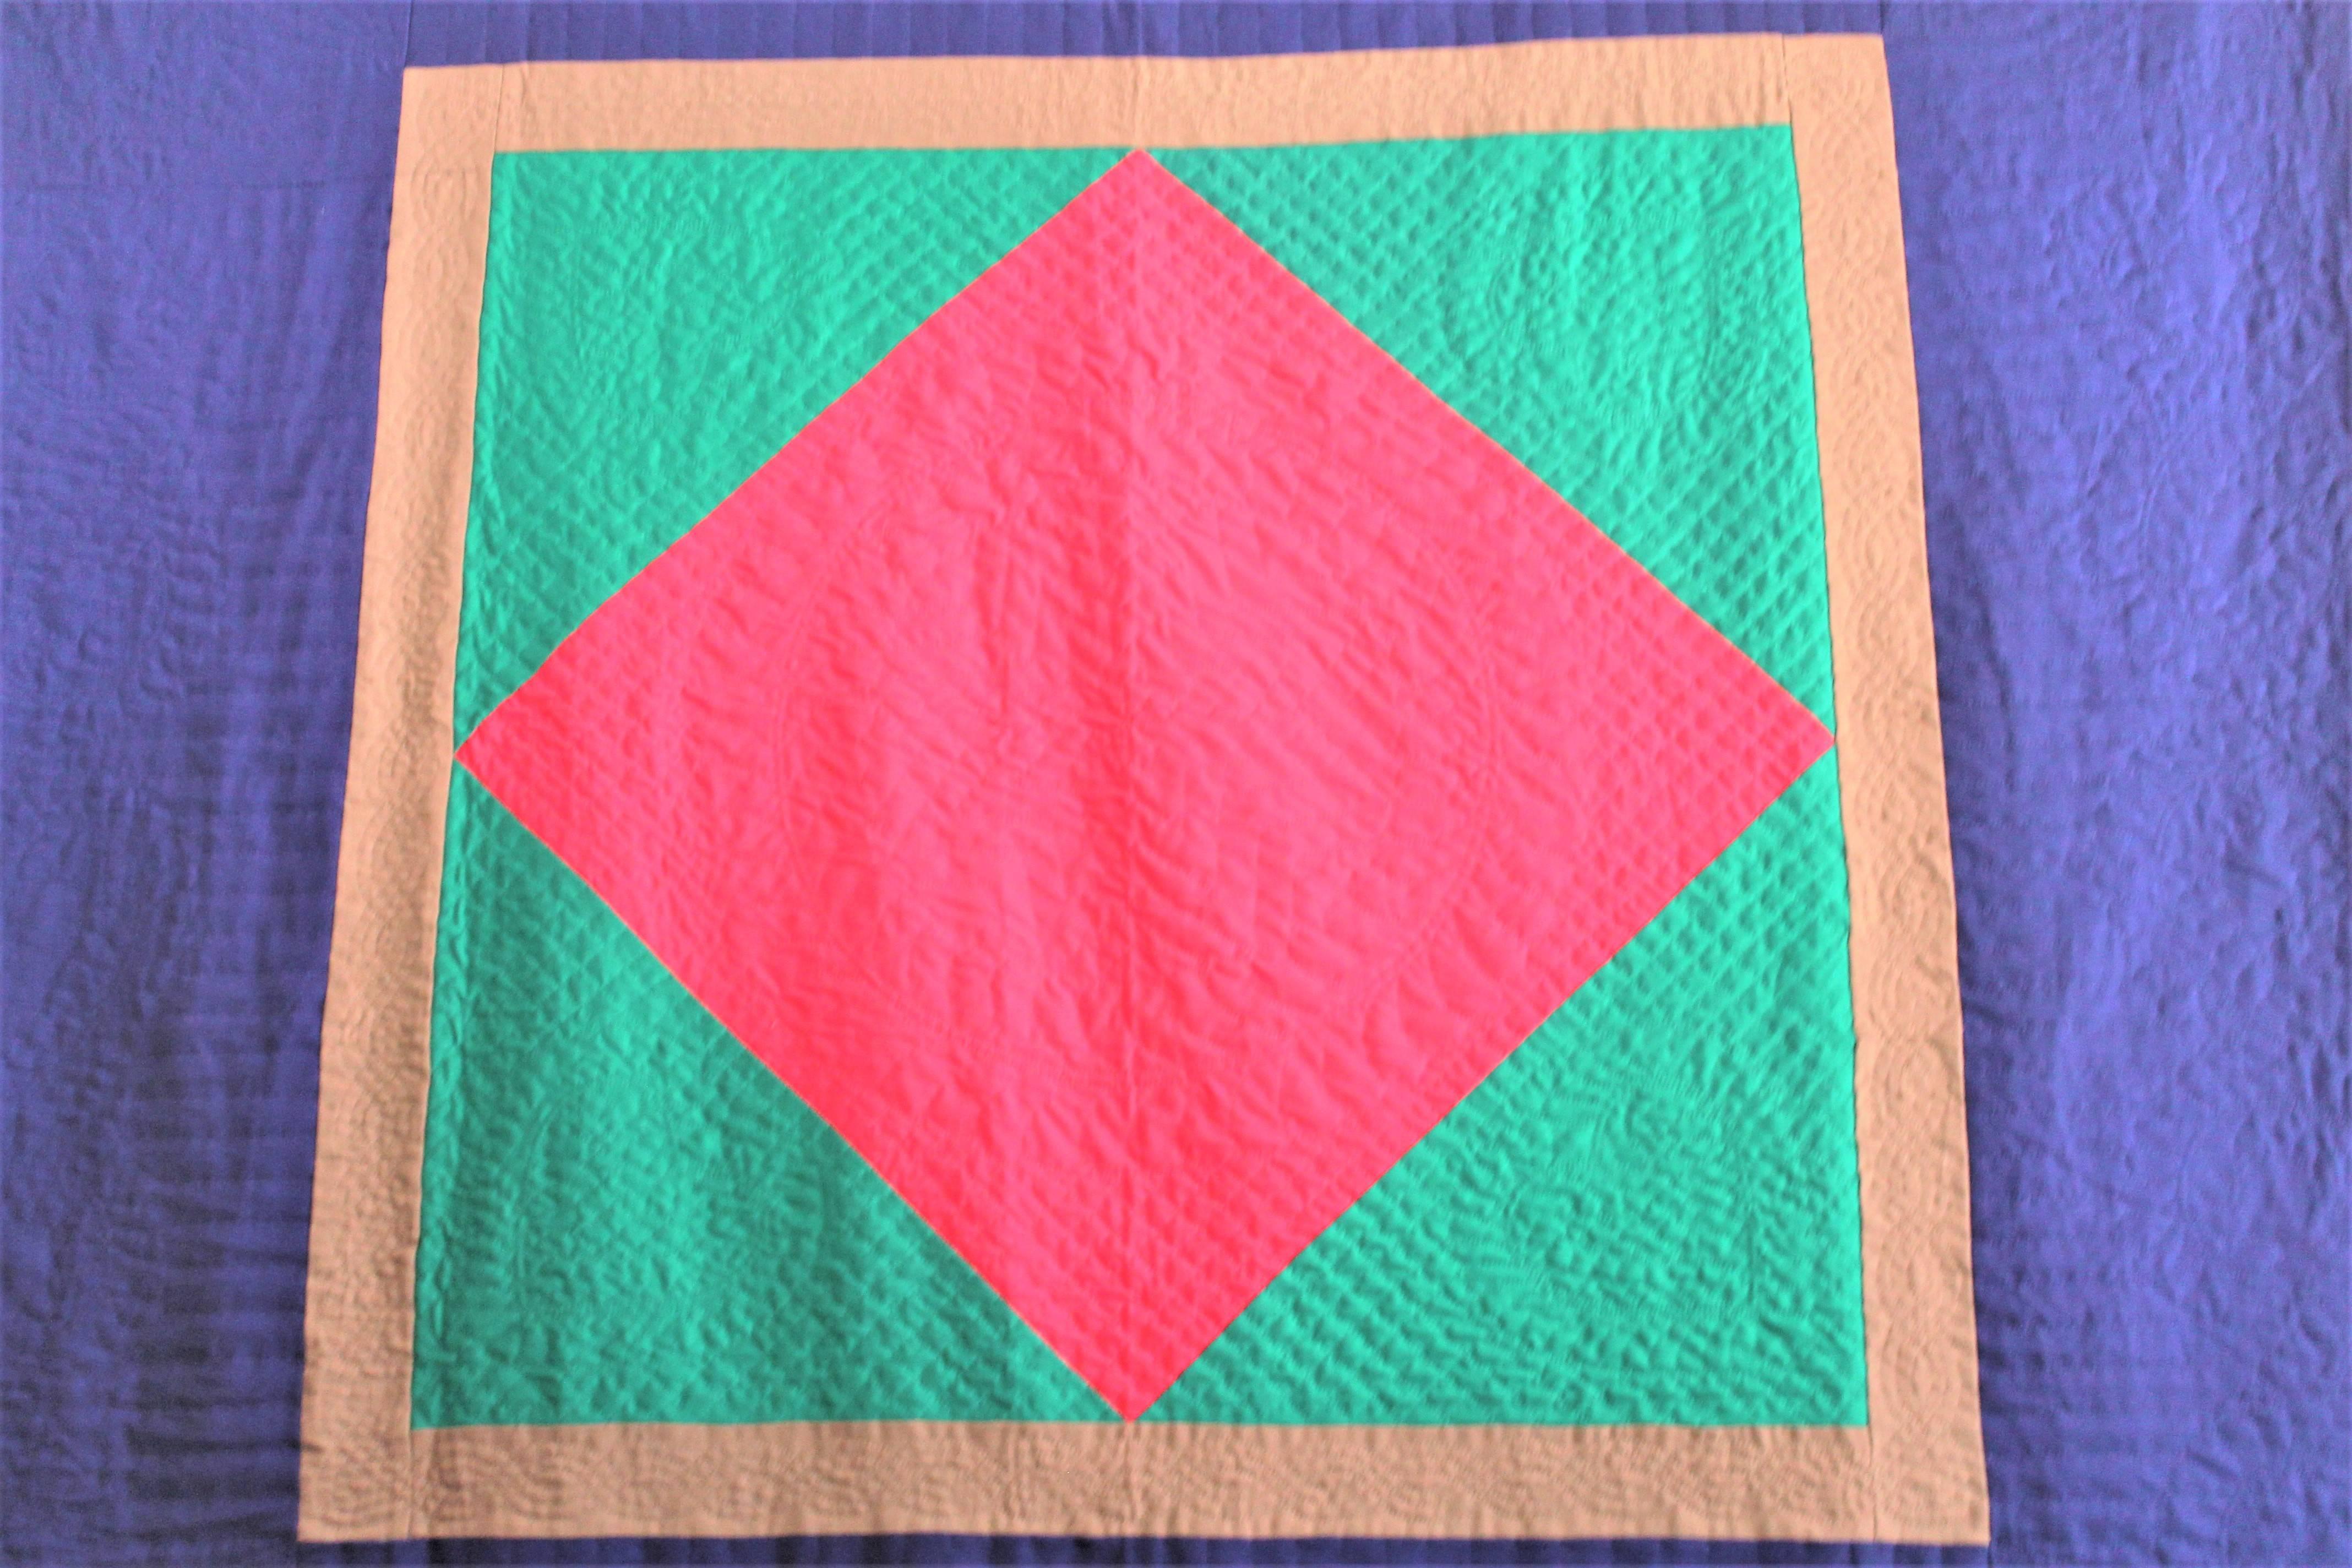 This amazing all wool floating diamond in a square quilt is in fine condition and unusual colors. The centre diamond is in a cherry red with a large royal blue border. The quilting and piece work is the very best. This is a late but great quilt that